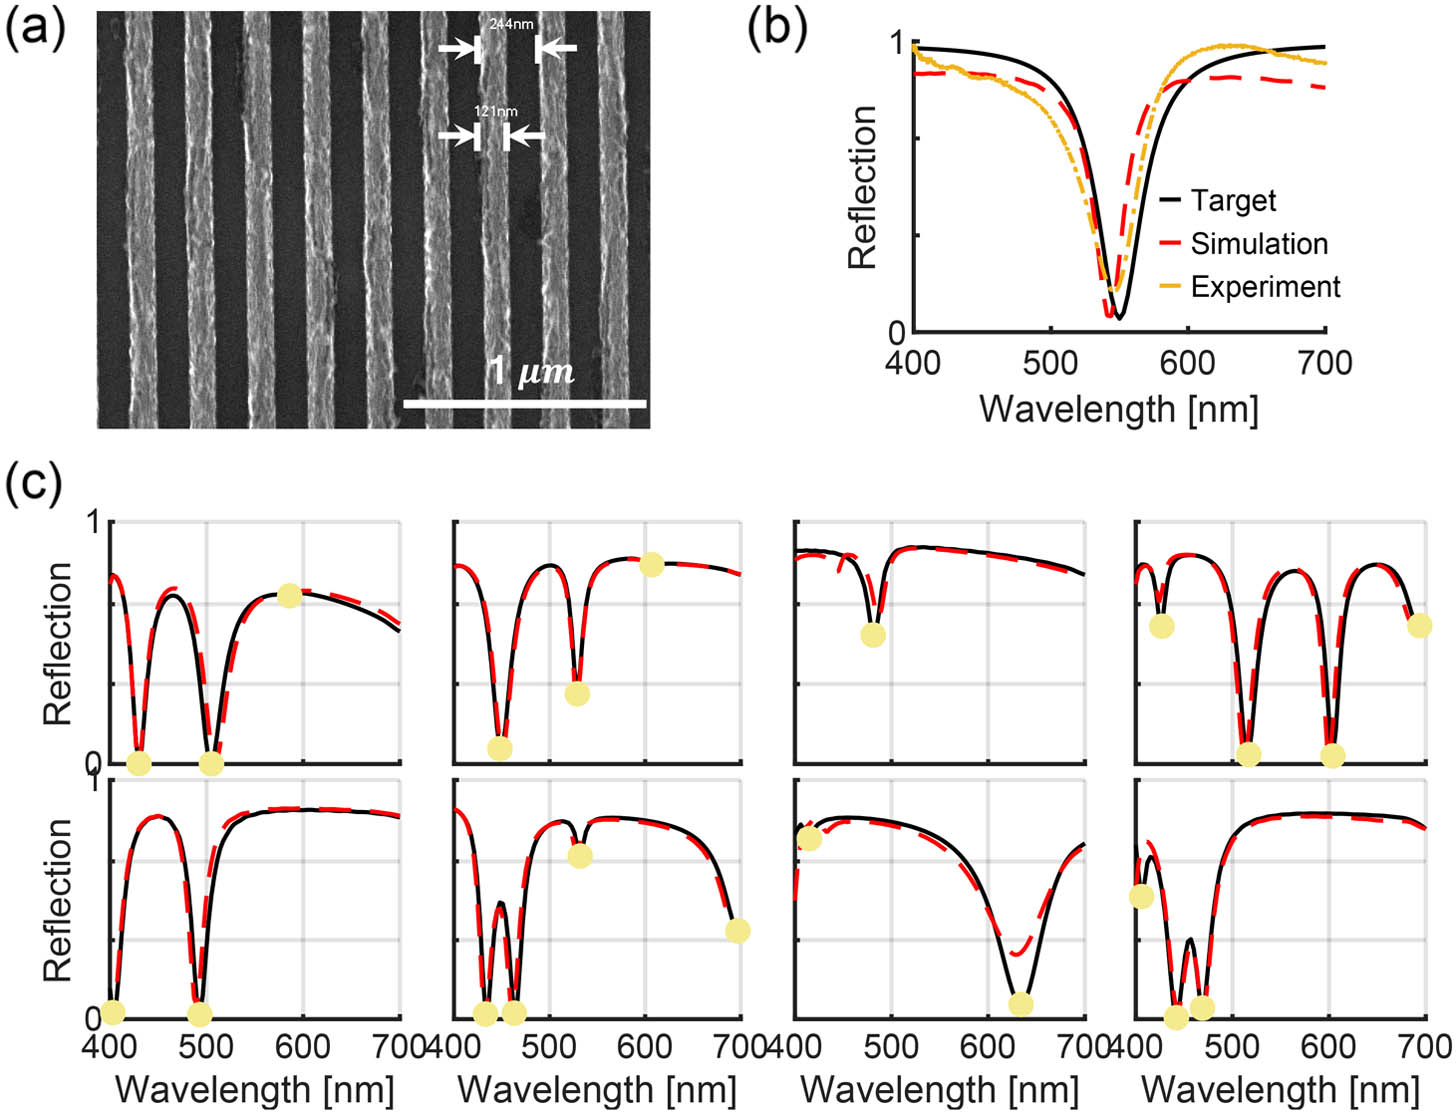 (a) Scanning electron microscope image of a designed grating structure with a scale bar of 1 μm. (b) Target reflection spectrum (black solid line) and designed optical properties obtained from the FDTD simulation (red dotted line) and experiment (yellow dotted line). Grating parameters with [P, Gr, h1, h2, hsub] = [245 nm, 120 nm, 42 nm, 113 nm, 195 nm] are designed by the network. (c) Examples of test results are shown. Black solid lines and red dotted lines are the input and target reflection spectra, respectively, and yellow markers are indexed resonant wavelengths.